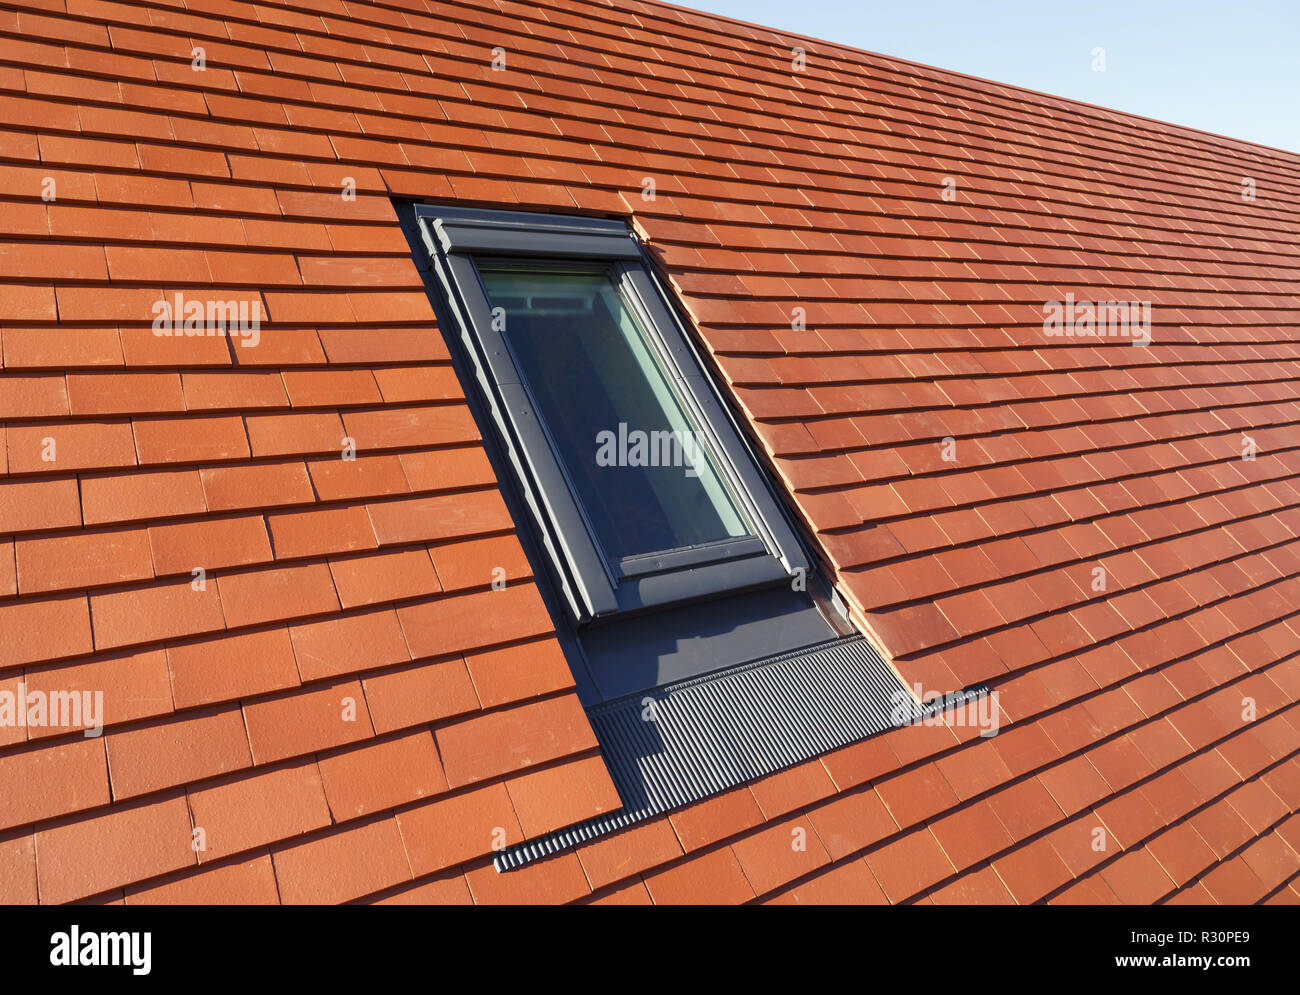 Velux type roof light window in a traditional plain clay tile house roof Stock Photo